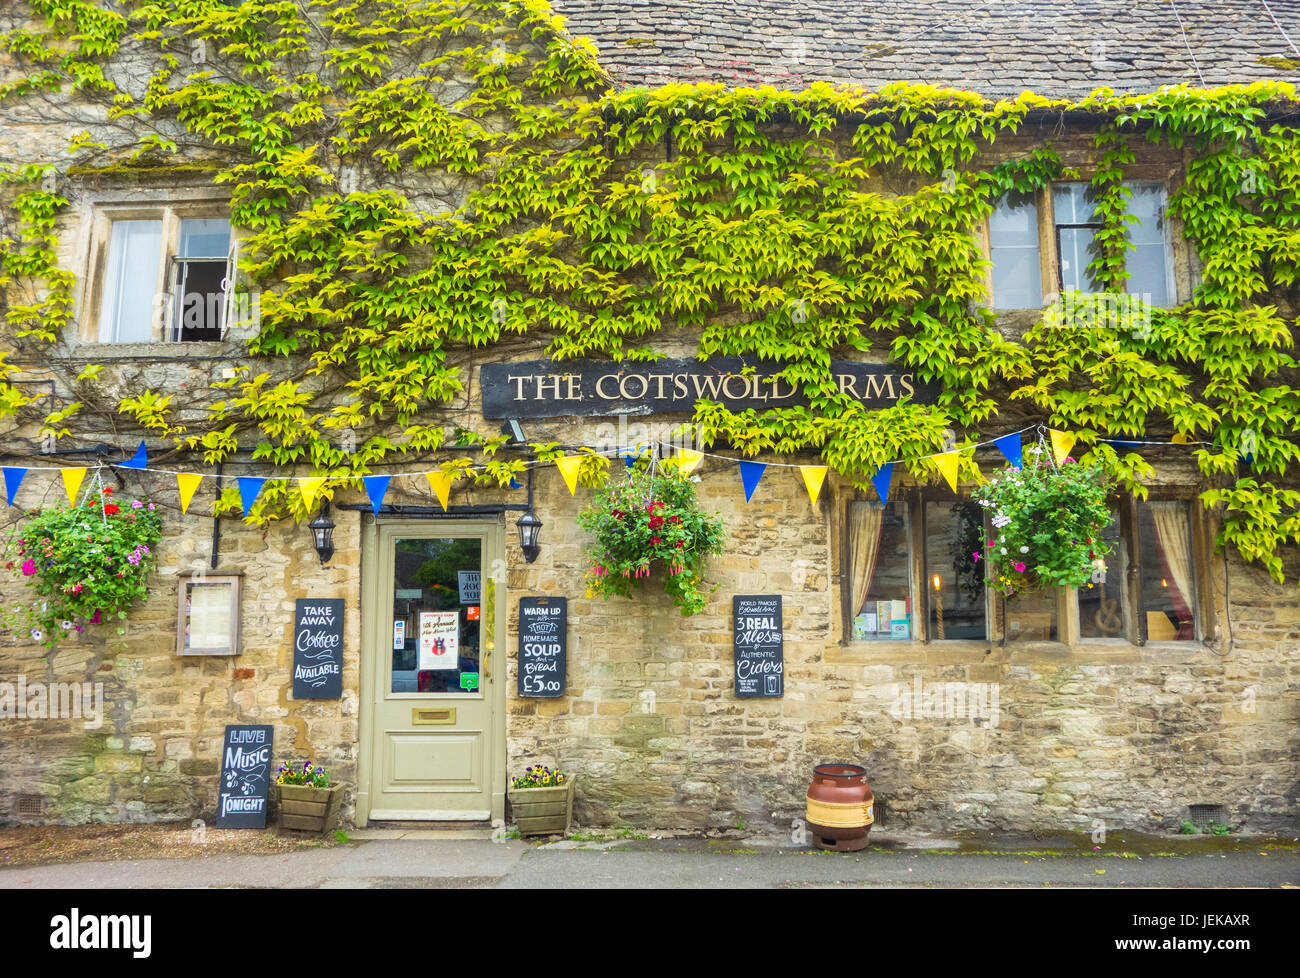 The Cotswold Arms public house Burford Oxfordshire England UK Stock Photo